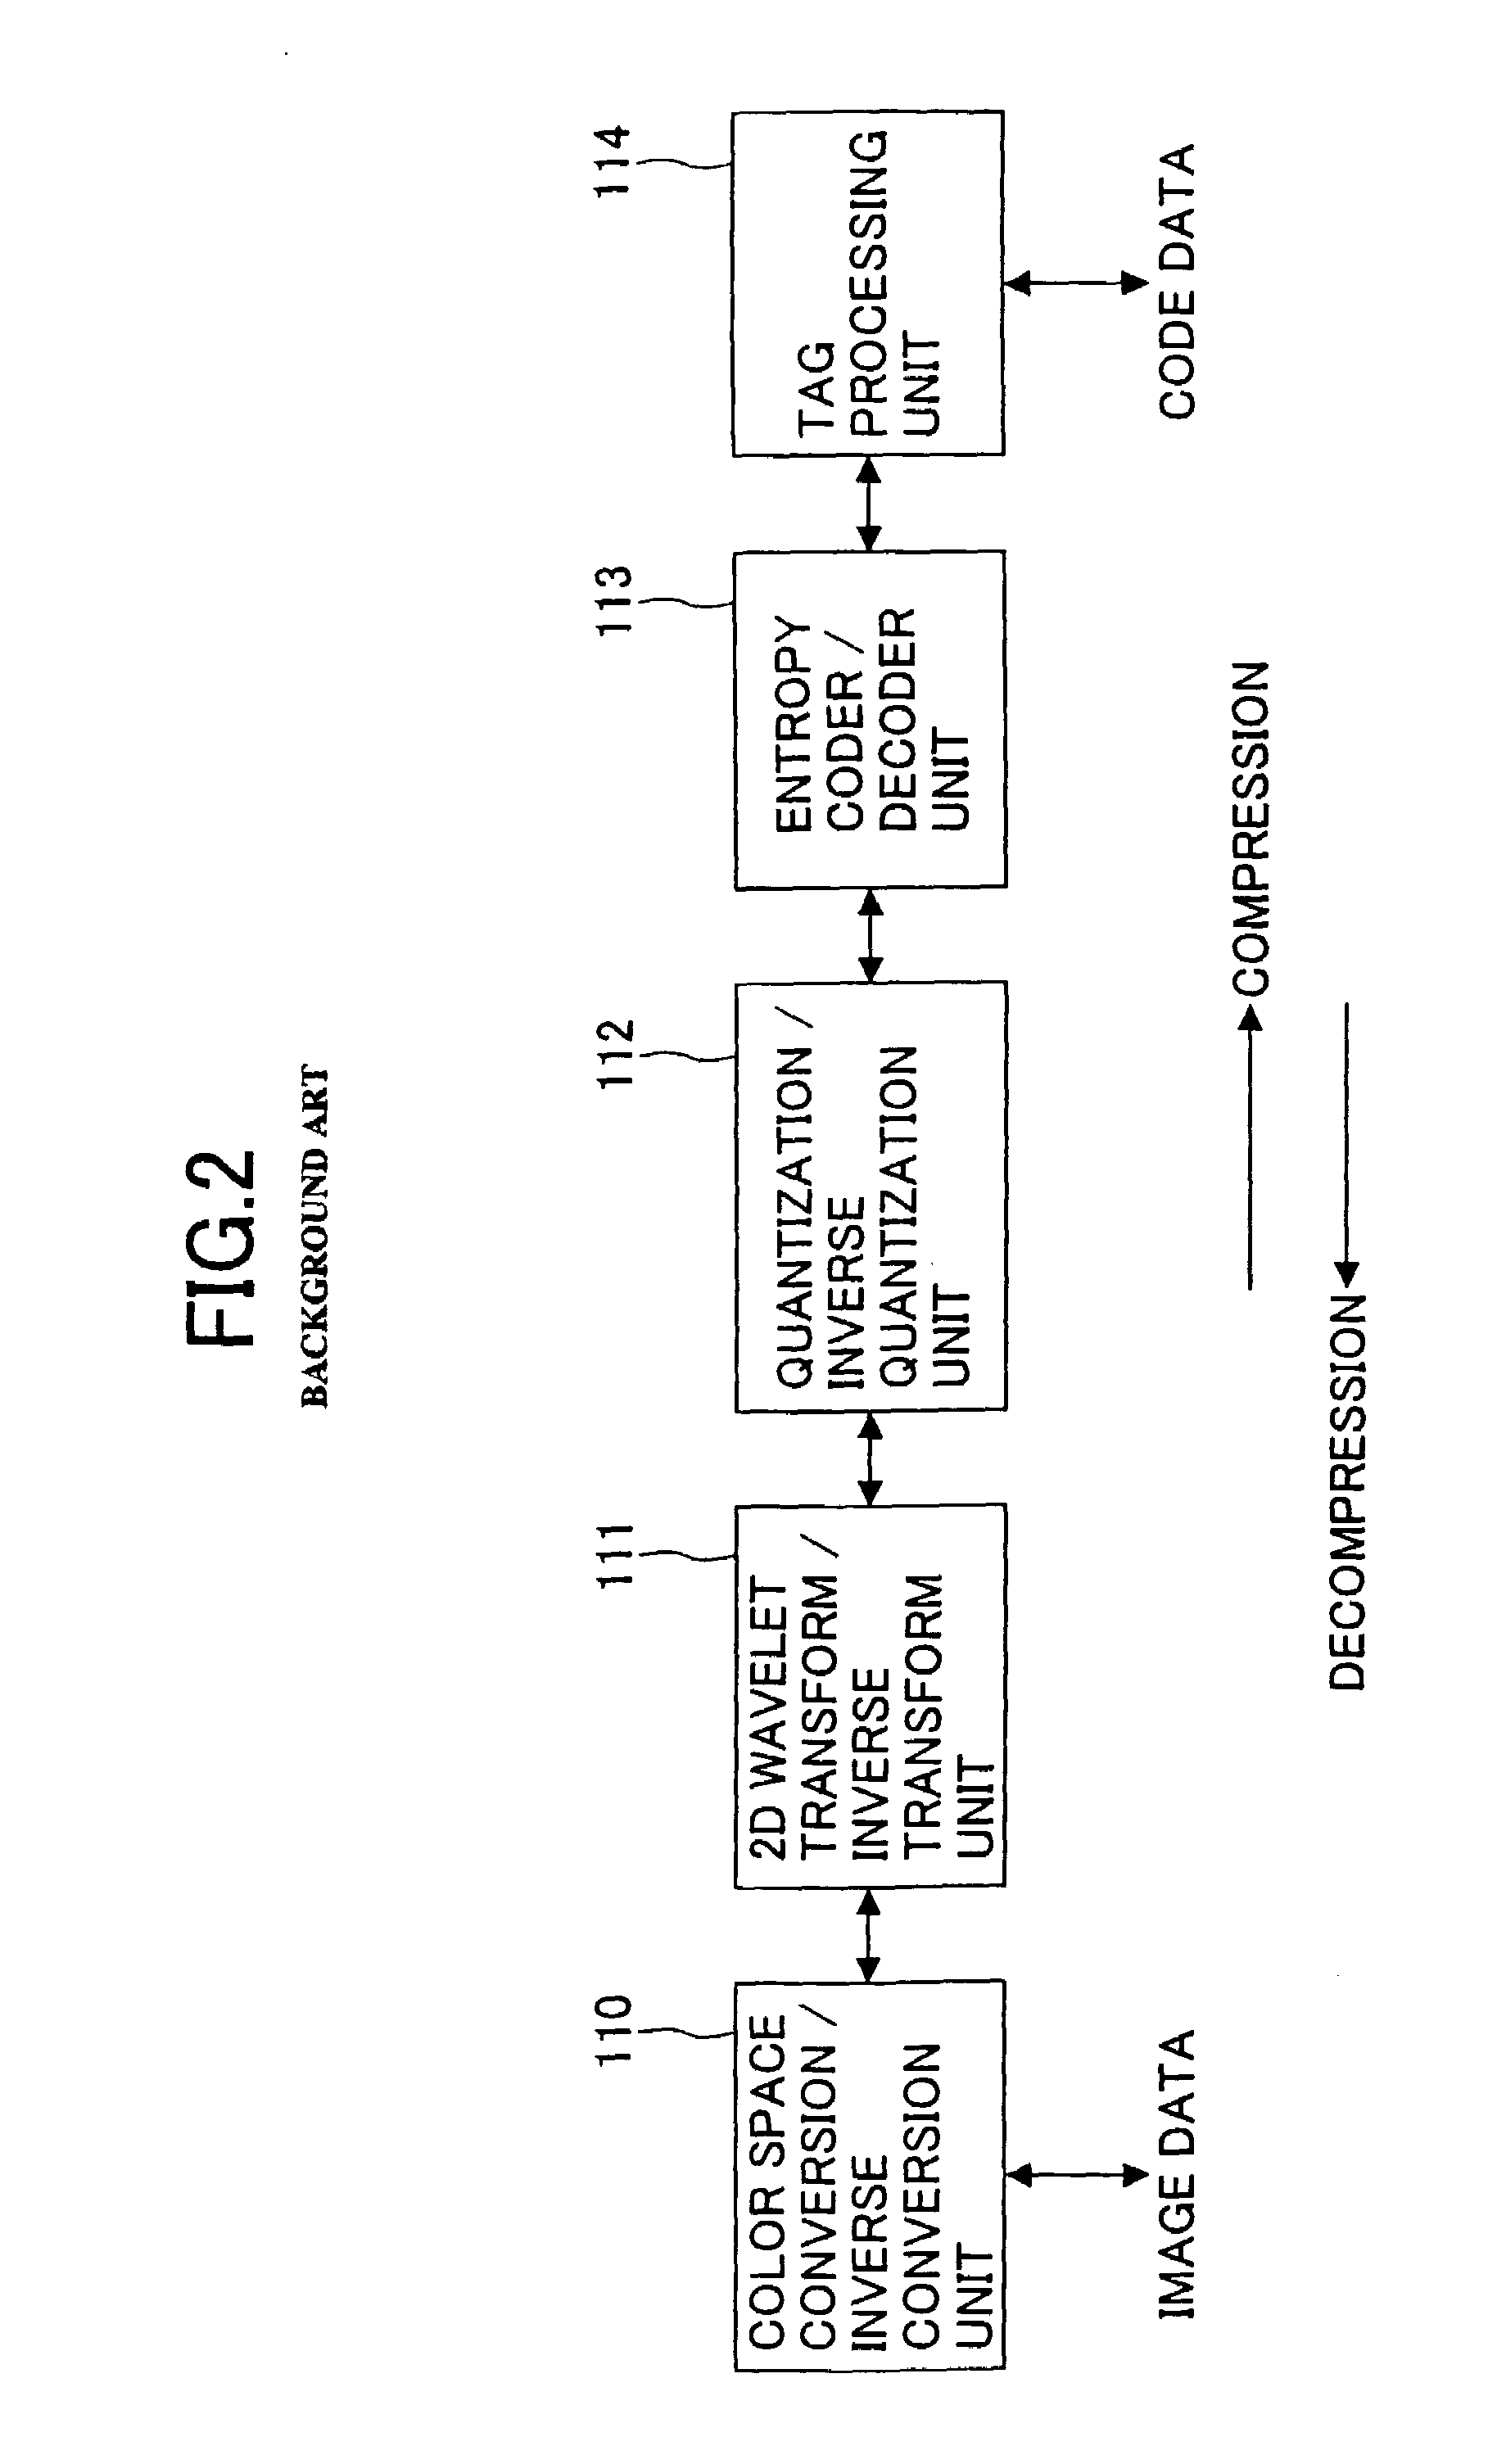 Image processing apparatus for compositing images